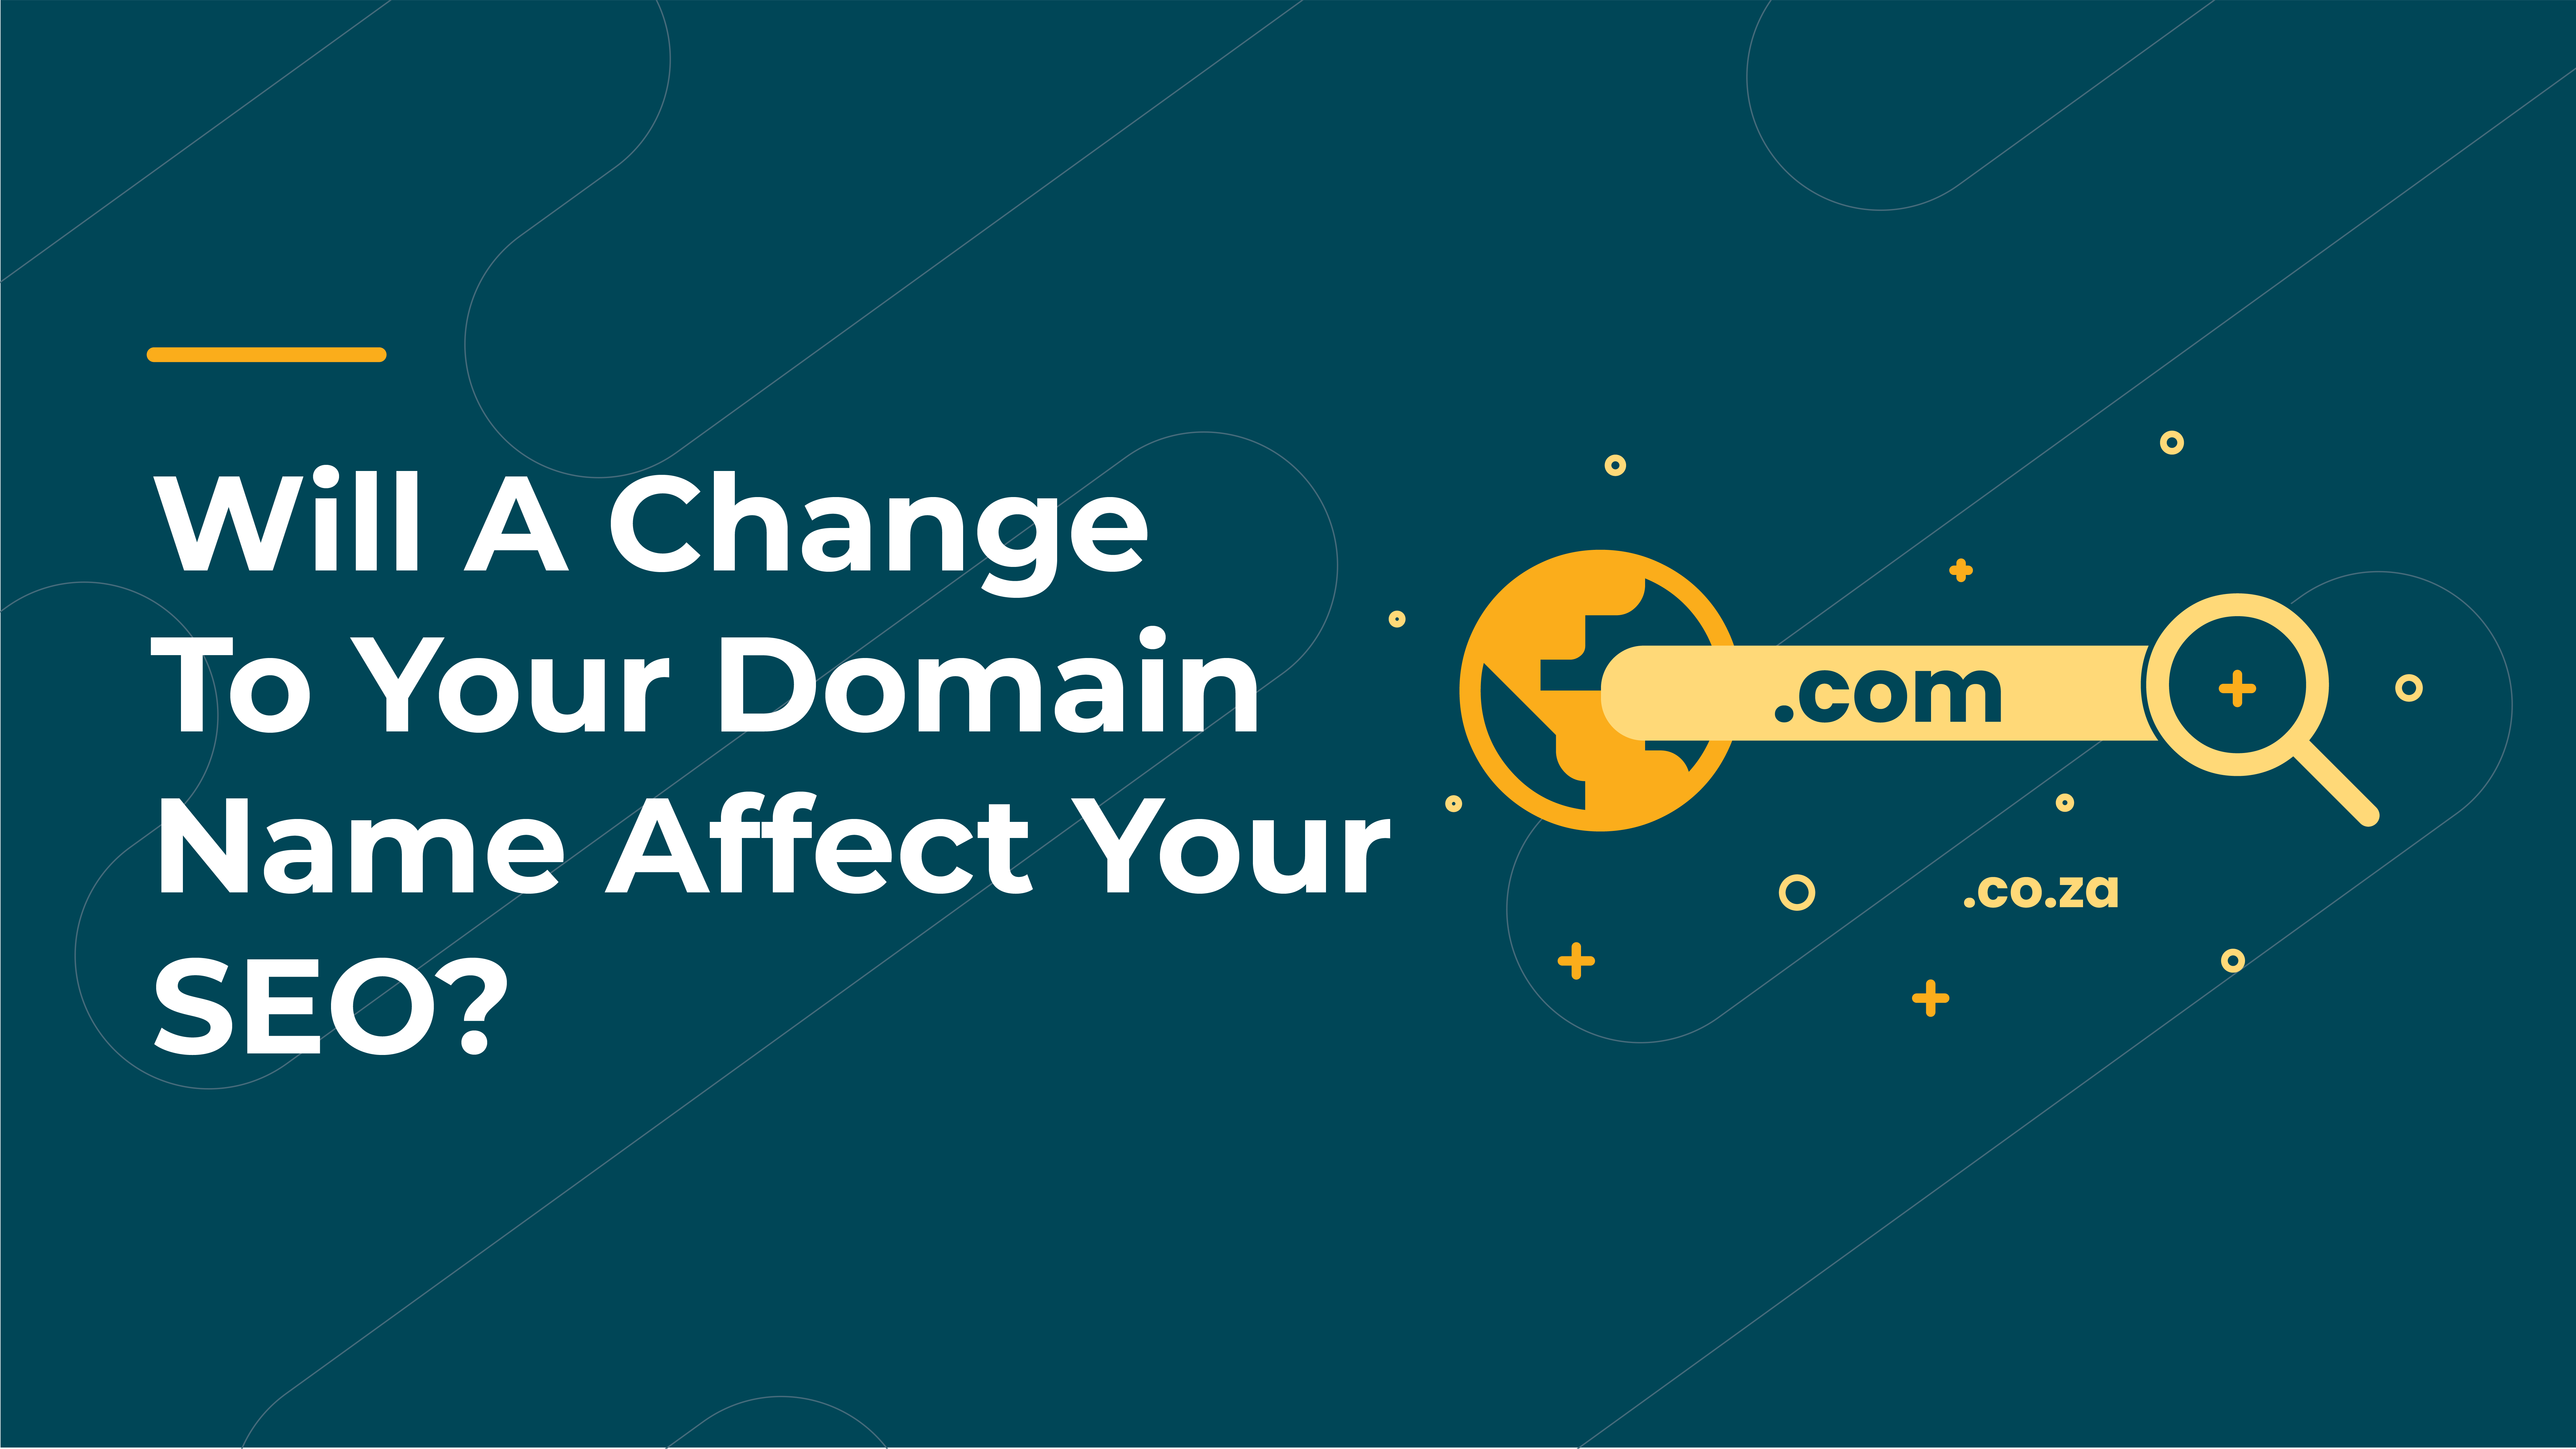 Will a change to your domain name affect your SEO?